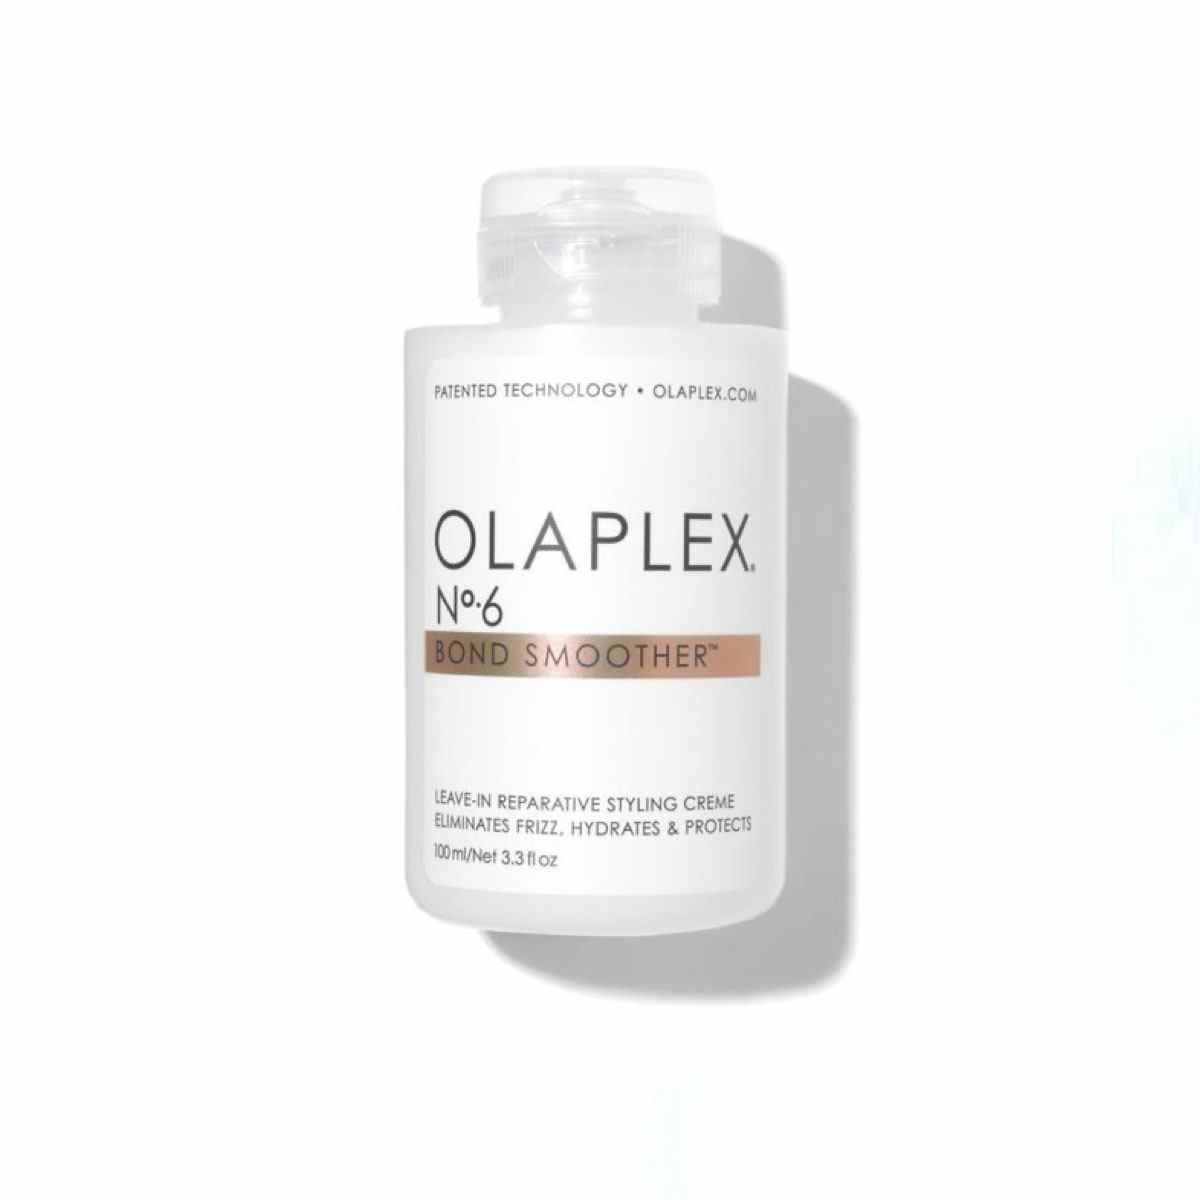 White Olaplex No. 6 Bond Smoother Leave-In Reparative Styling Cream Flasche